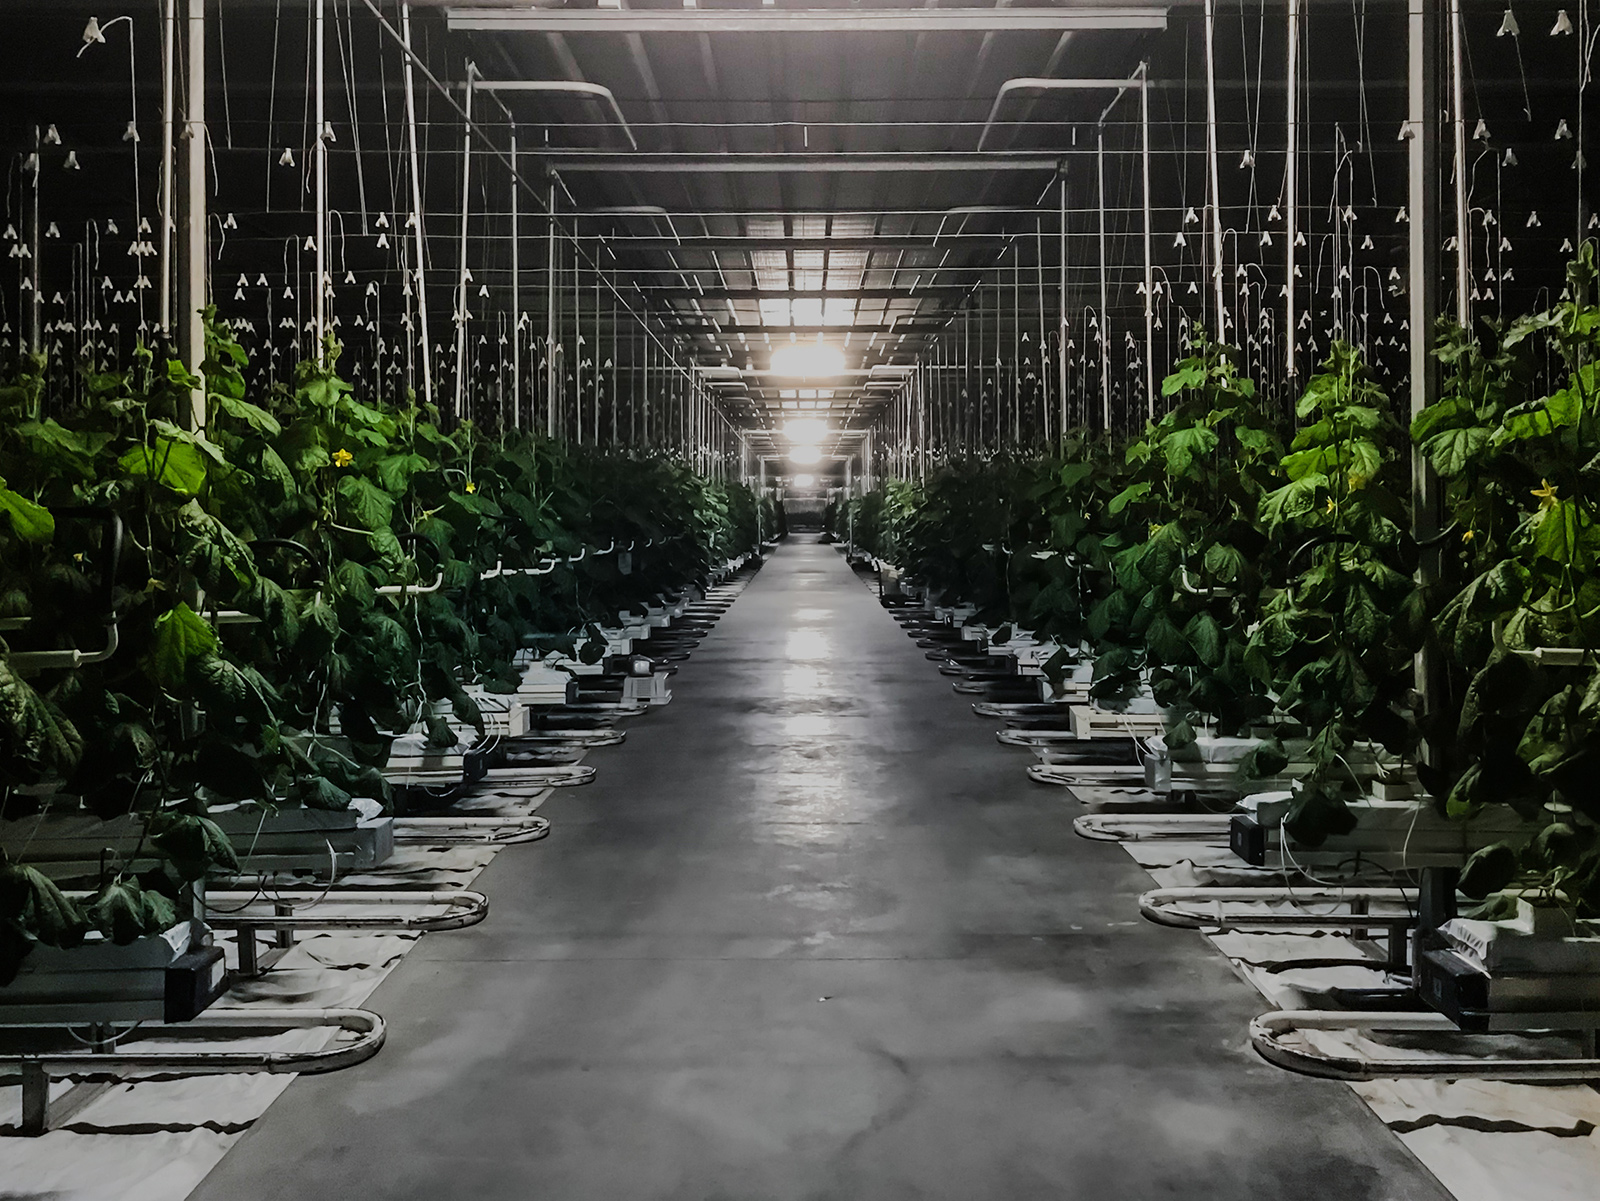 The Inside of a Commercial Greenhouse using Blackout Cloth to Darken It